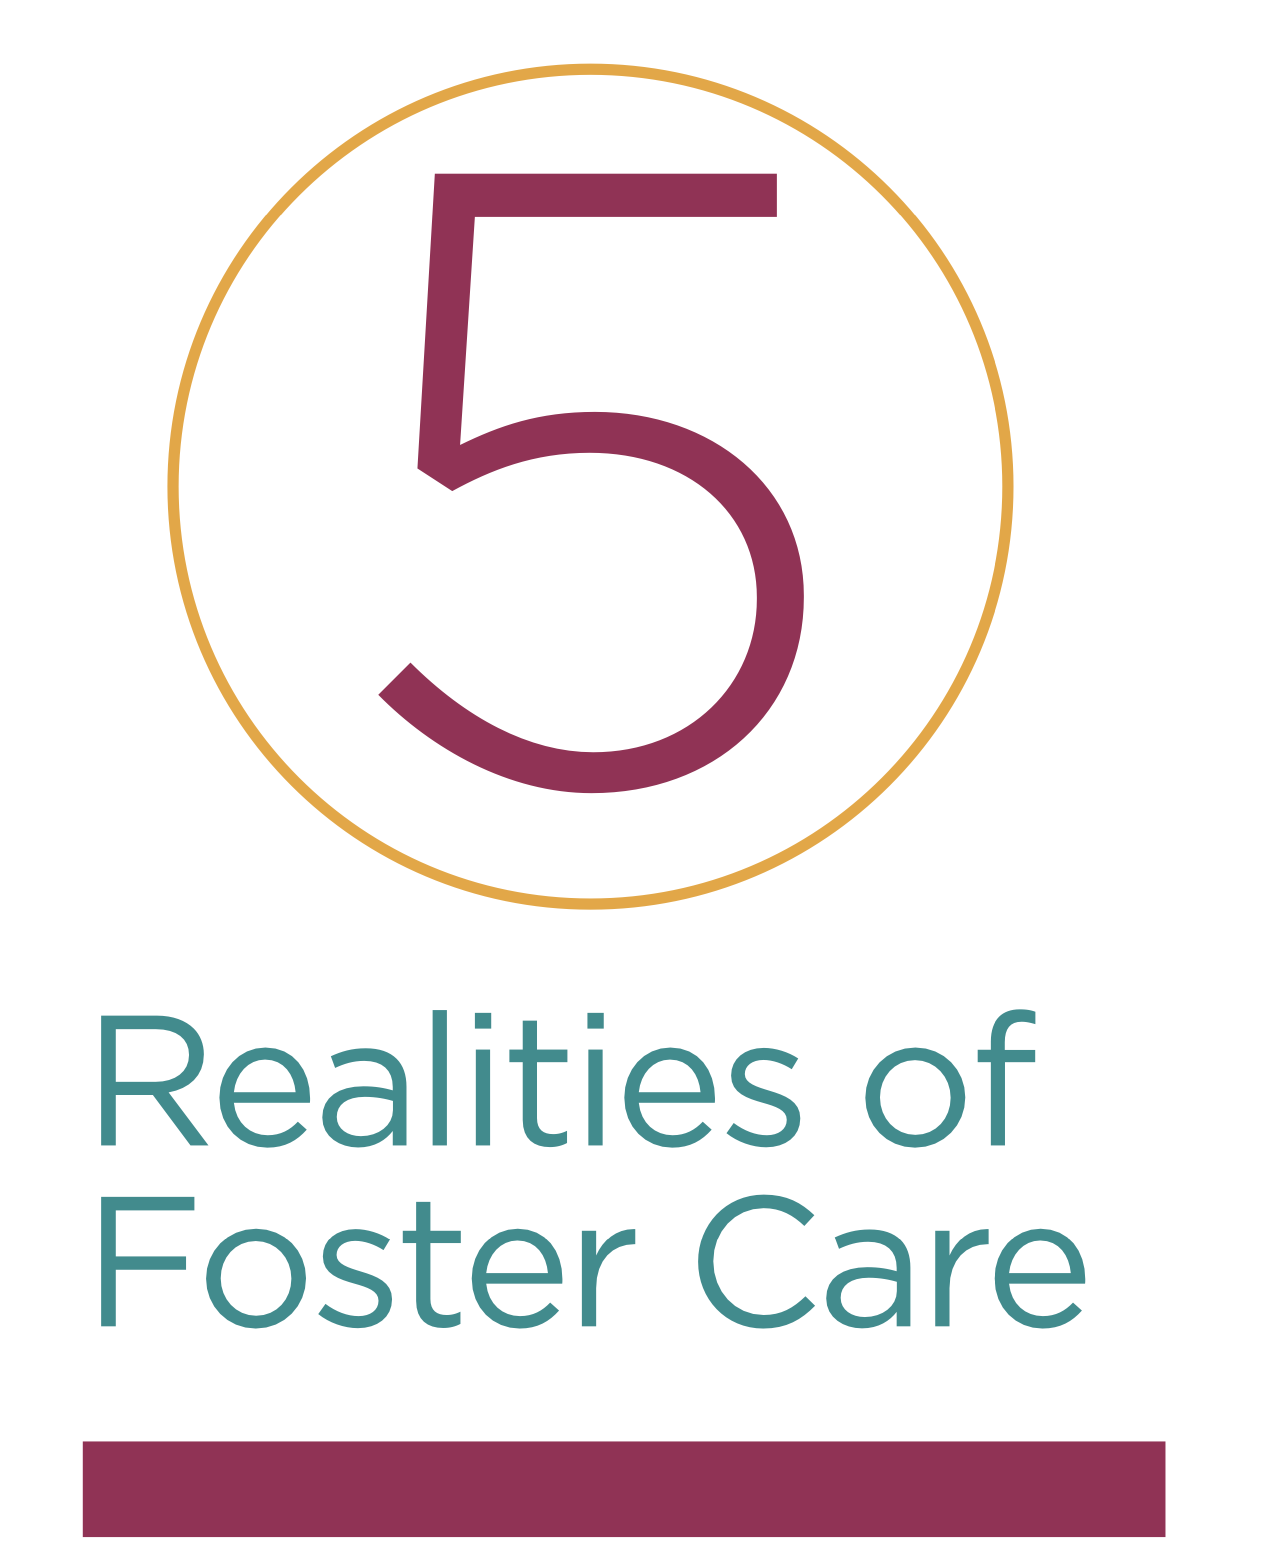 Five Myths Versus Realities of Foster Care